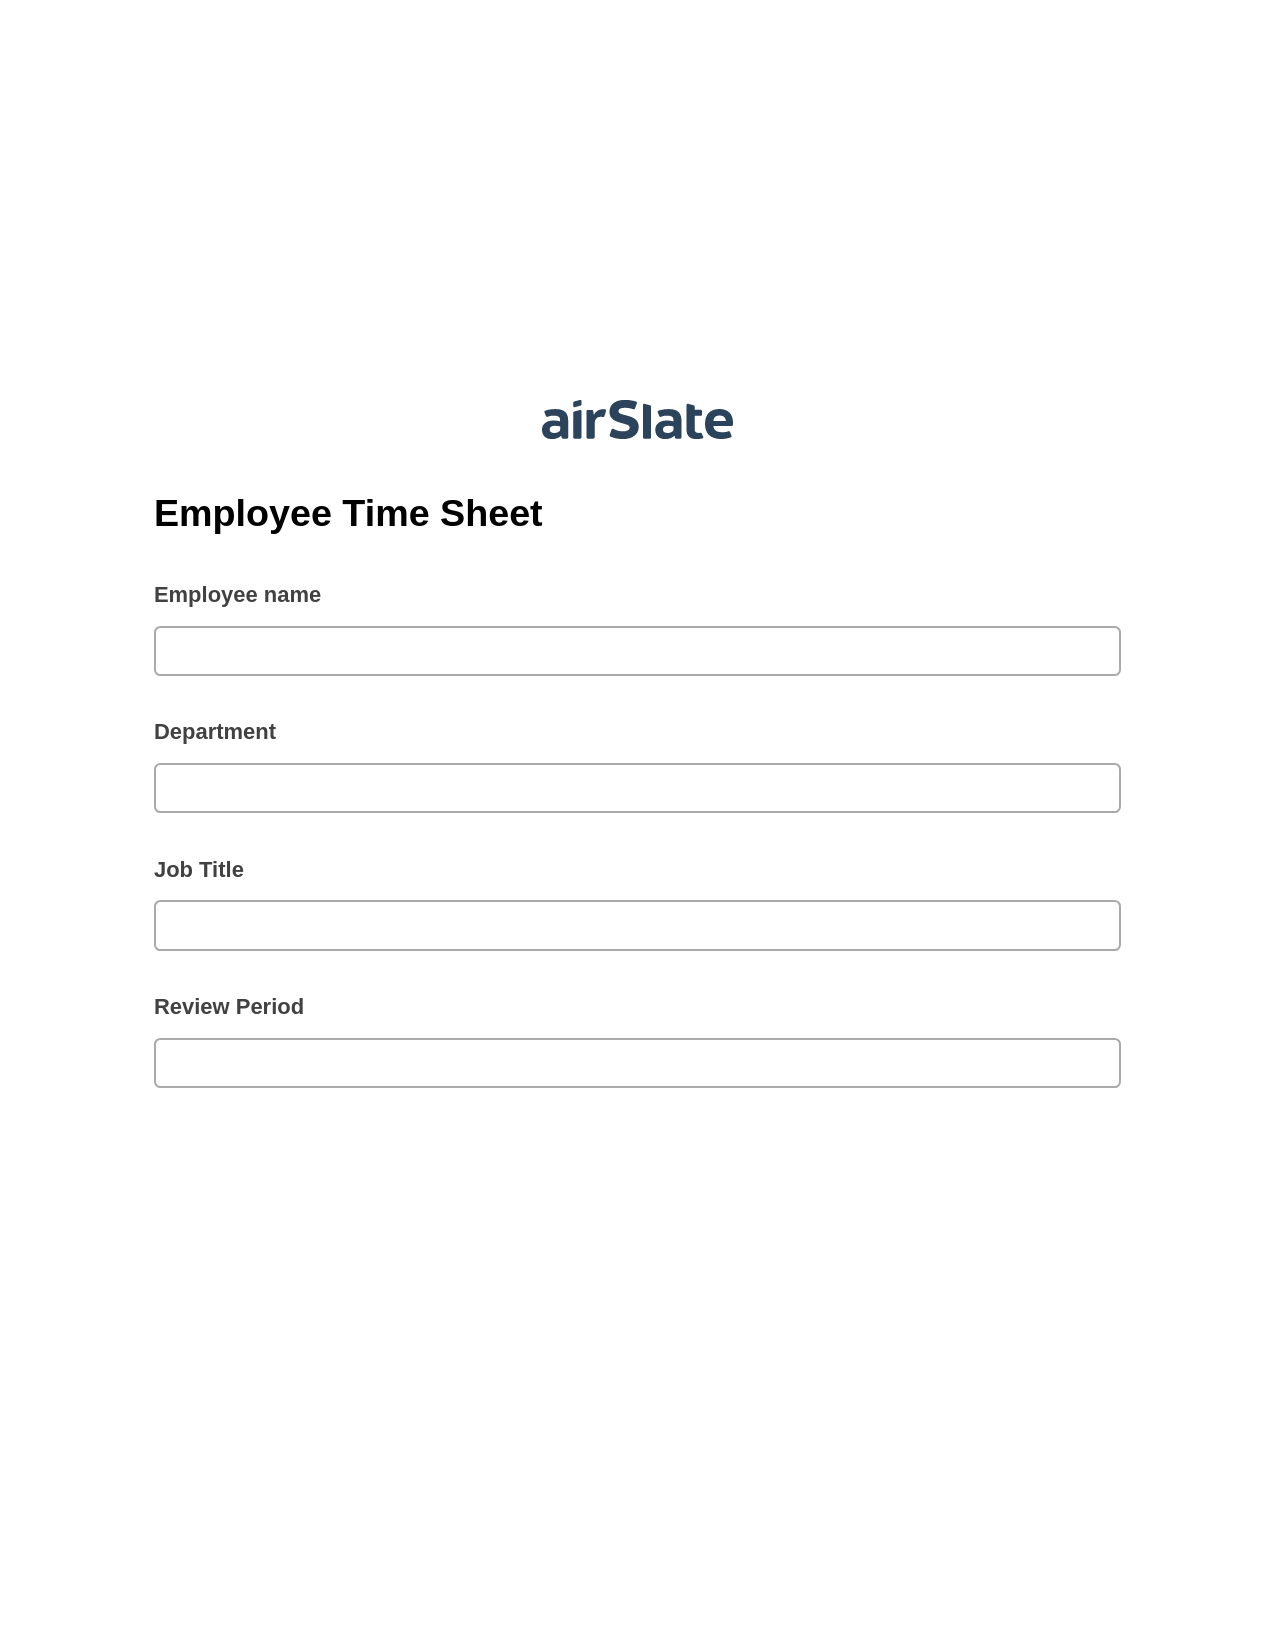 Multirole Employee Time Sheet System Bot - Slack Two-Way Binding Bot, Create slate from another Flow Bot, Archive to SharePoint Folder Bot